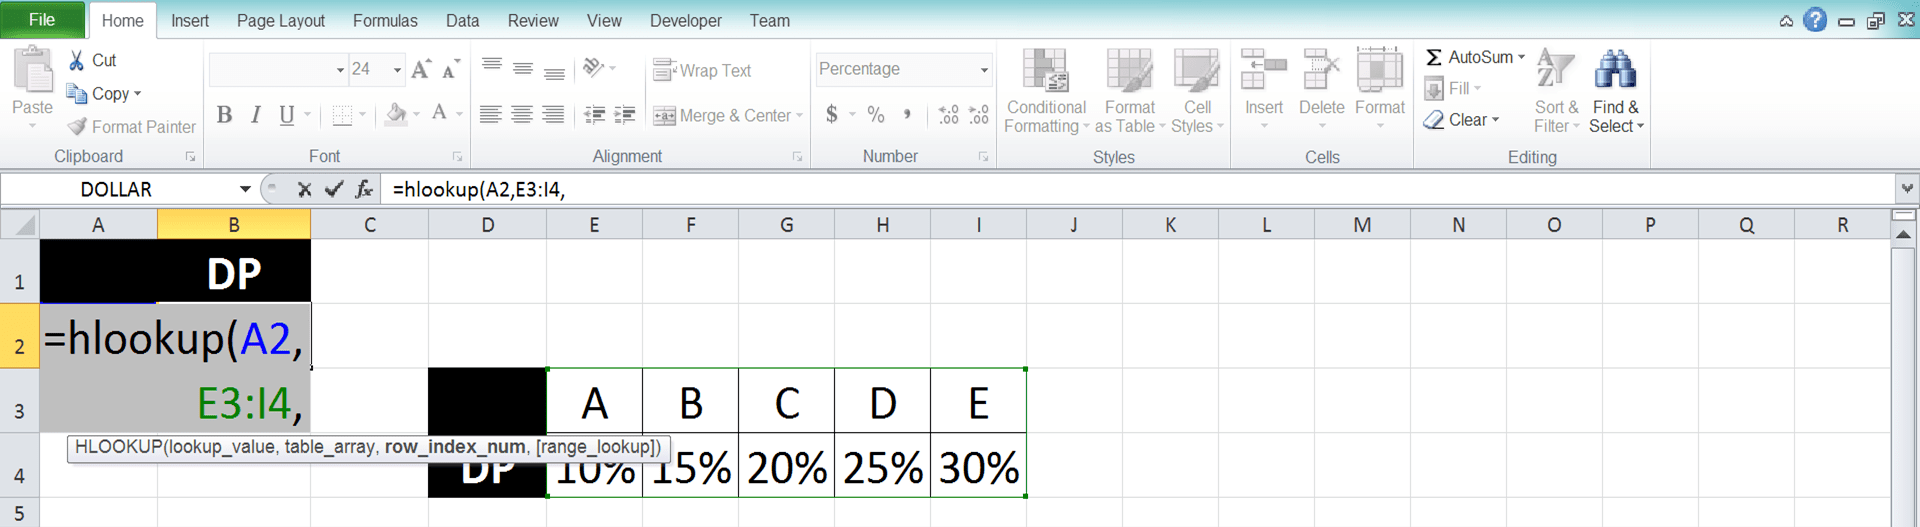 VLOOKUP and HLOOKUP in Excel: Functions, Examples, and How to Use - Screenshot of Step 4 (HLOOKUP)